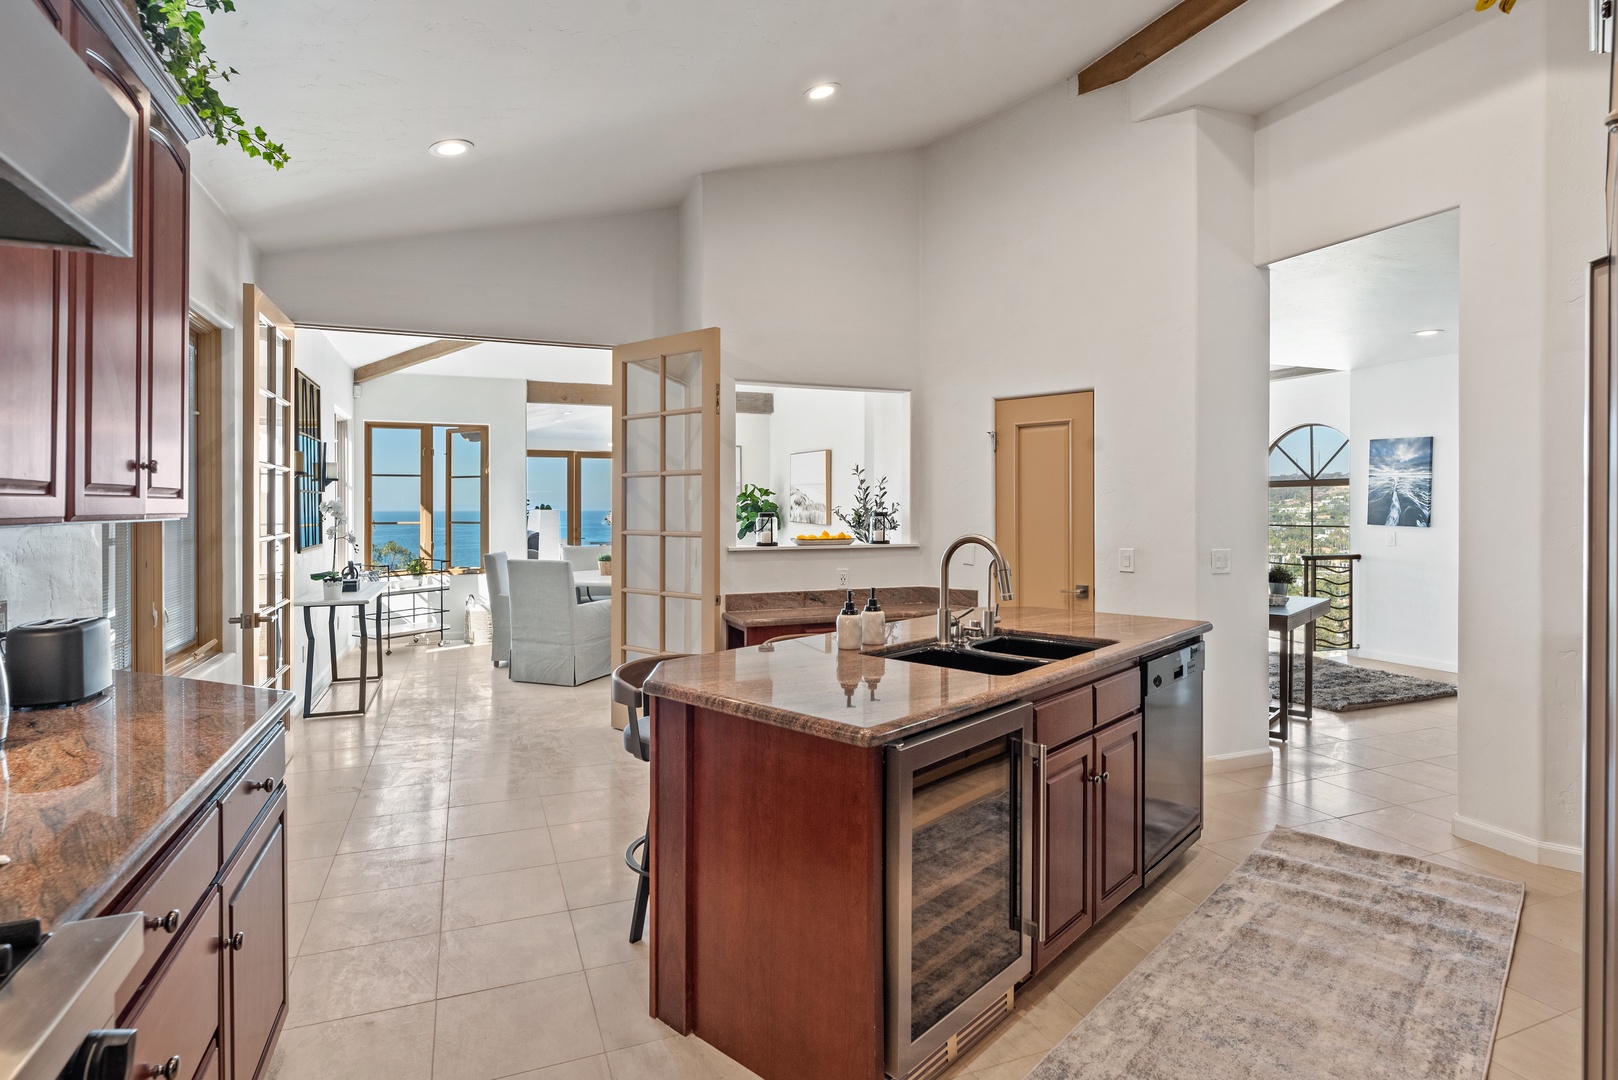 La Jolla Vacation Rentals, Coastal Lookout - The open floor plan and functionality of this home will impress every chef.  Wine cooler and dishwasher in the island for perfect service.